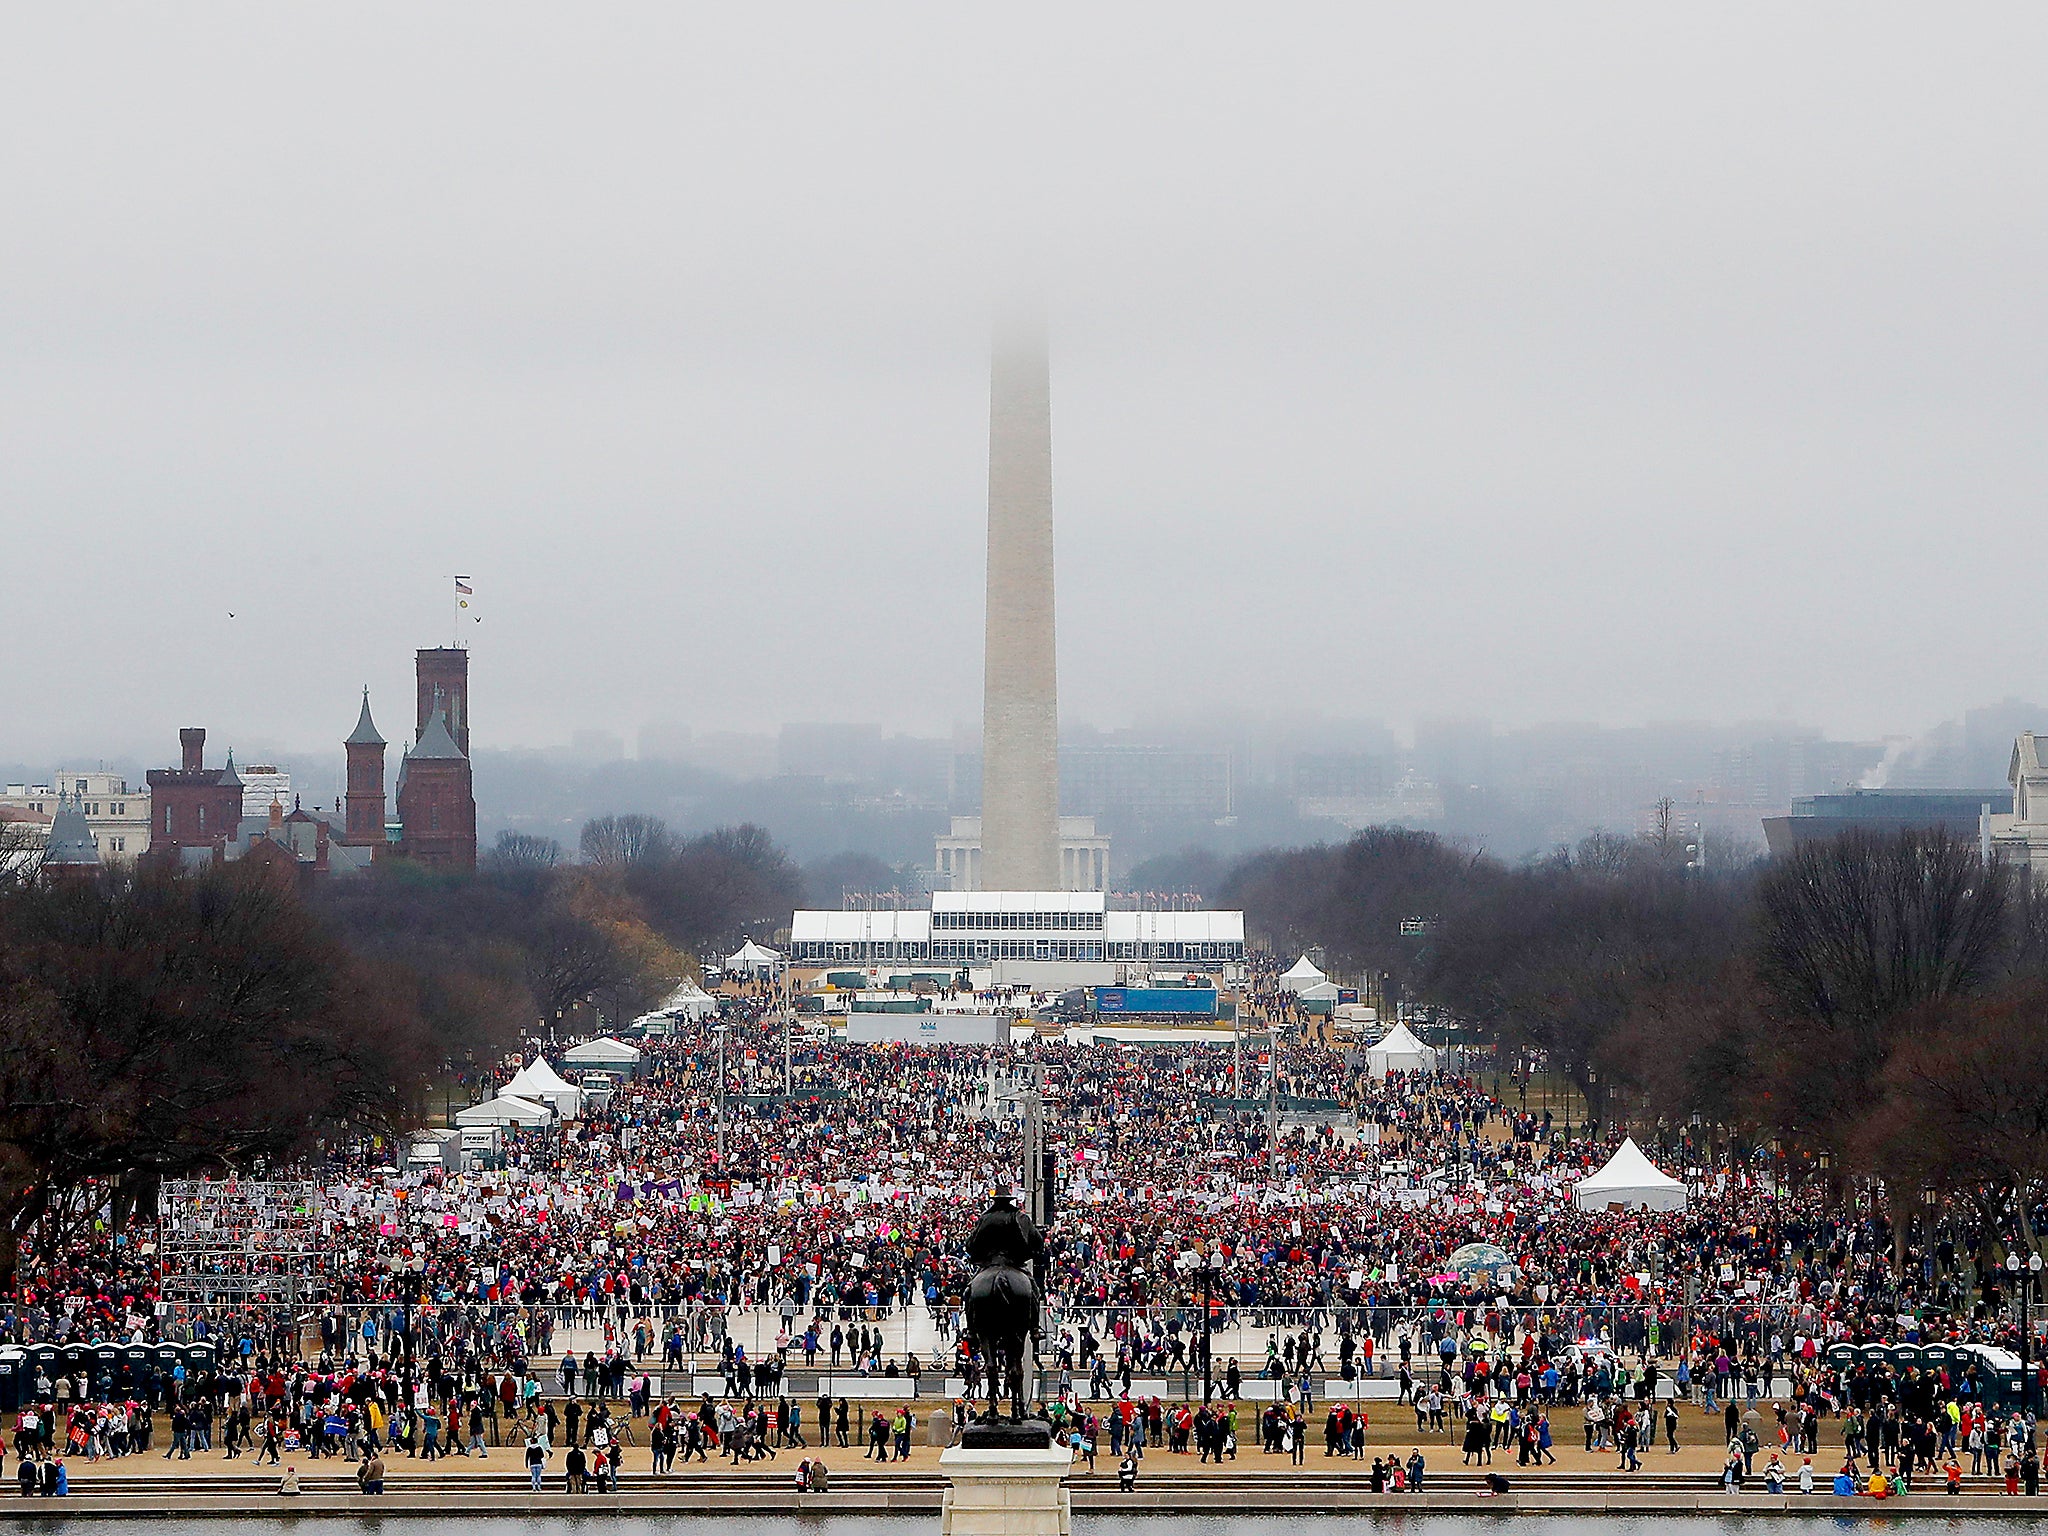 The Women's March on Washington alone had three times more attendees than Donald Trump's inauguration